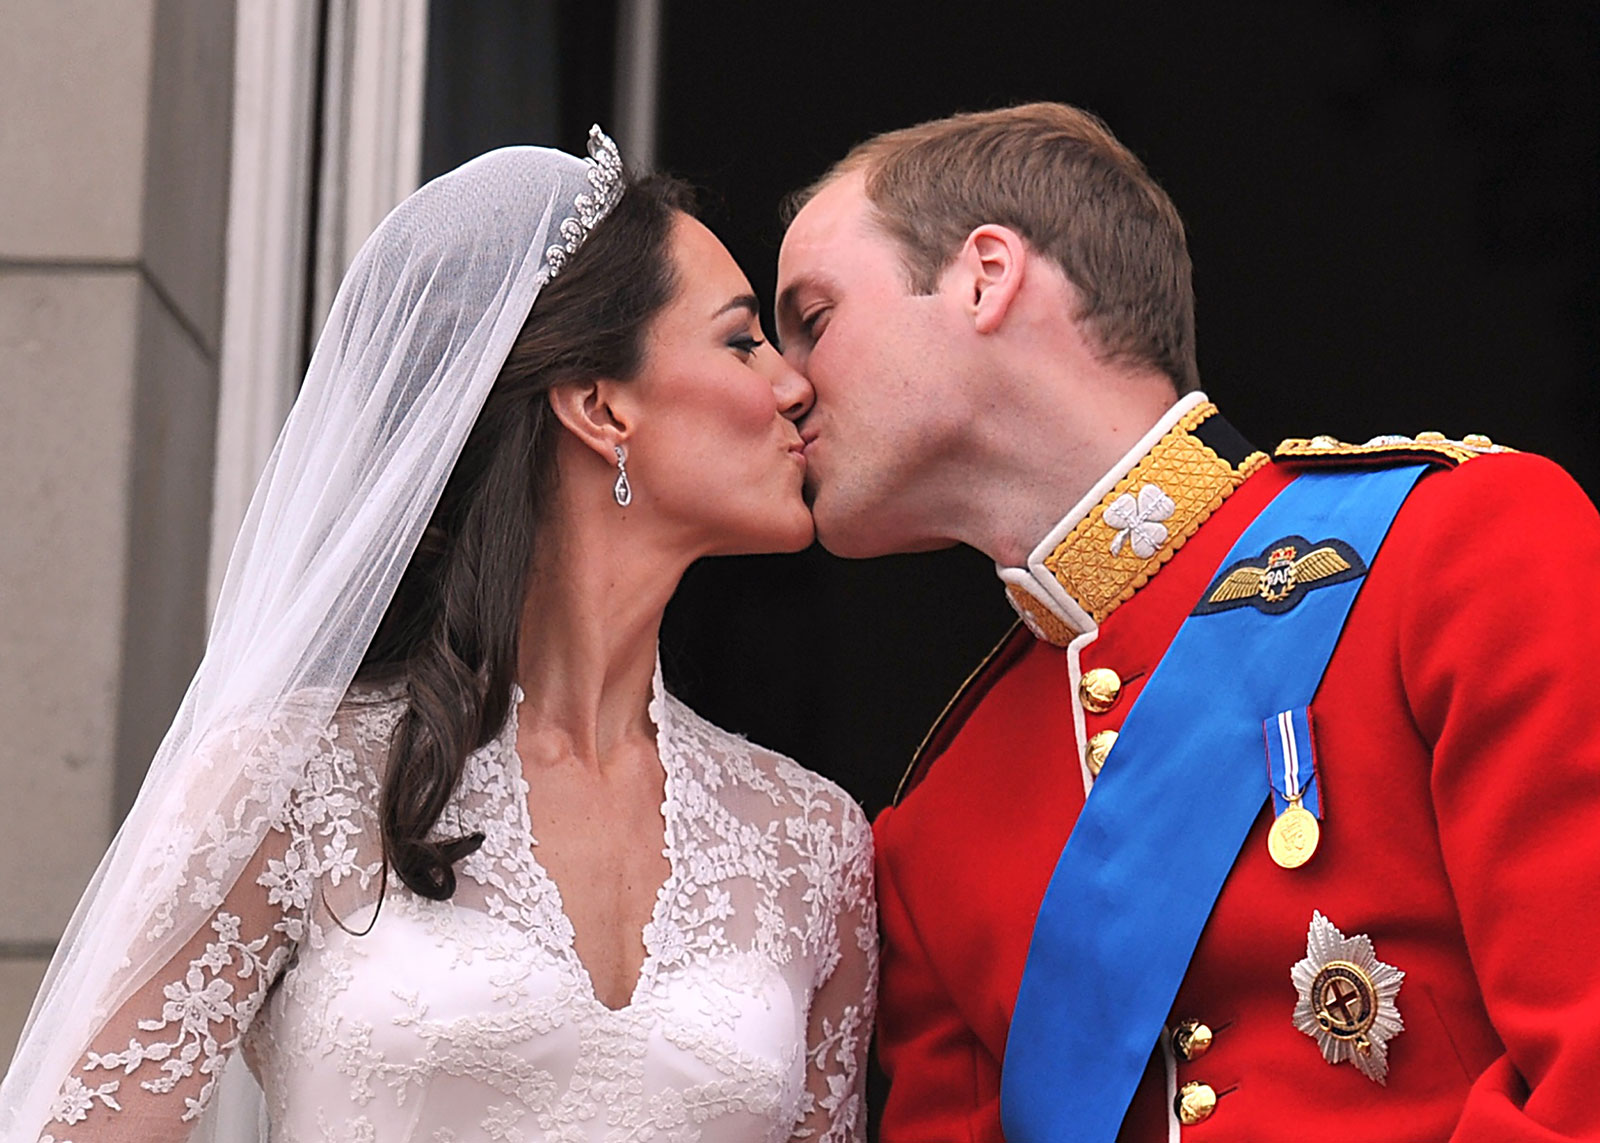 Prince William, Duke of Cambridge and Catherine, Duchess of Cambridge kiss on the balcony at Buckingham Palace during the Royal Wedding on April 29, 2011 in London, England. 